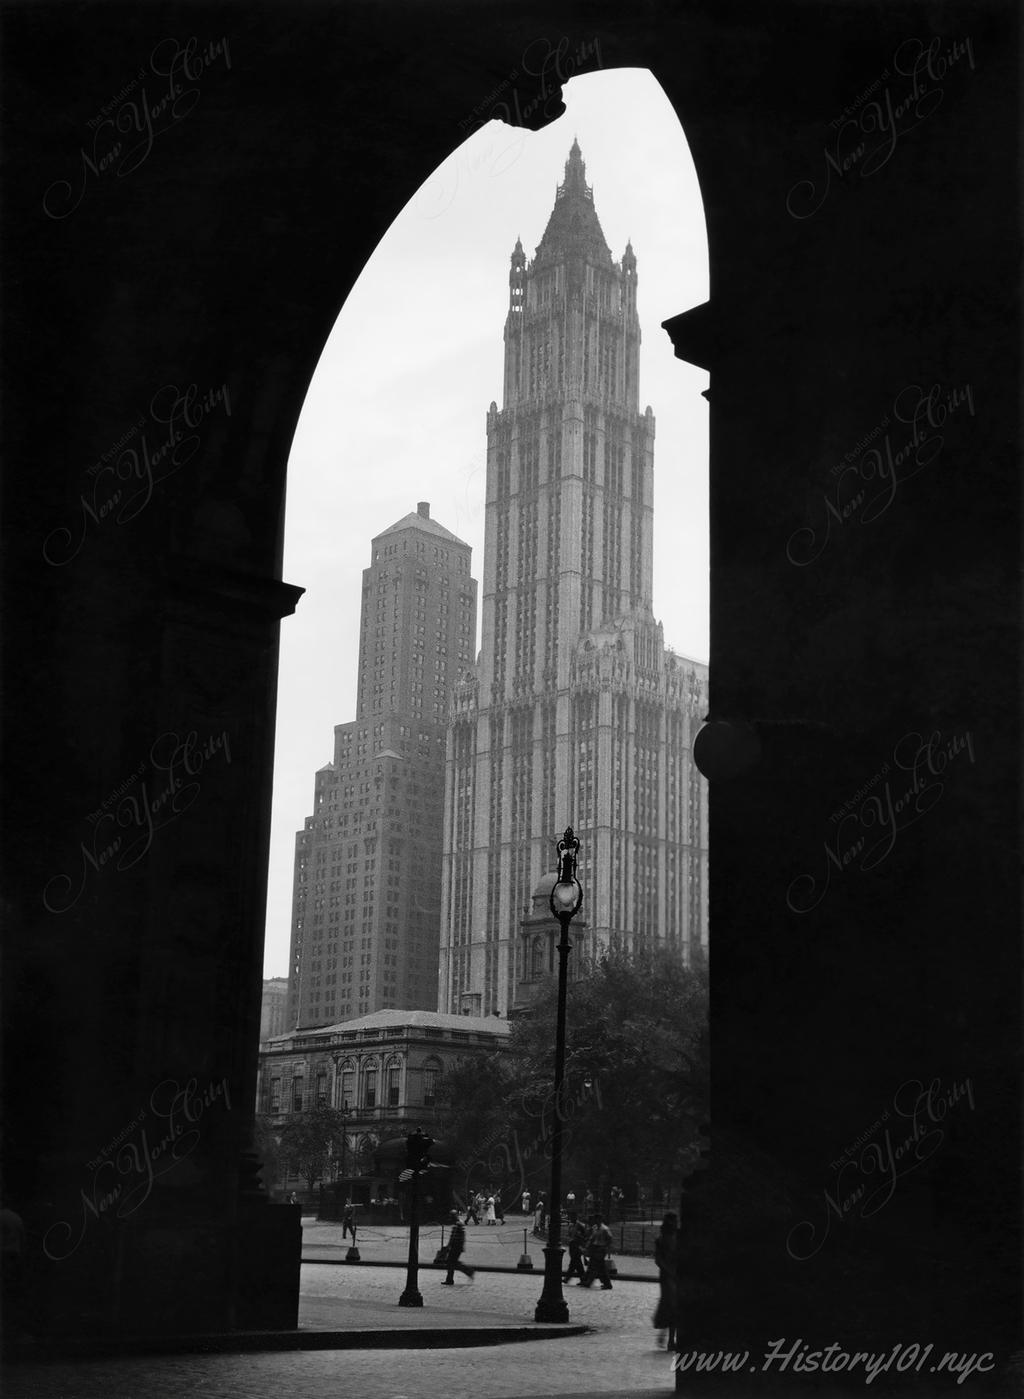 Photograph shows the Woolworth Building framed by the interior of an adjacent building.